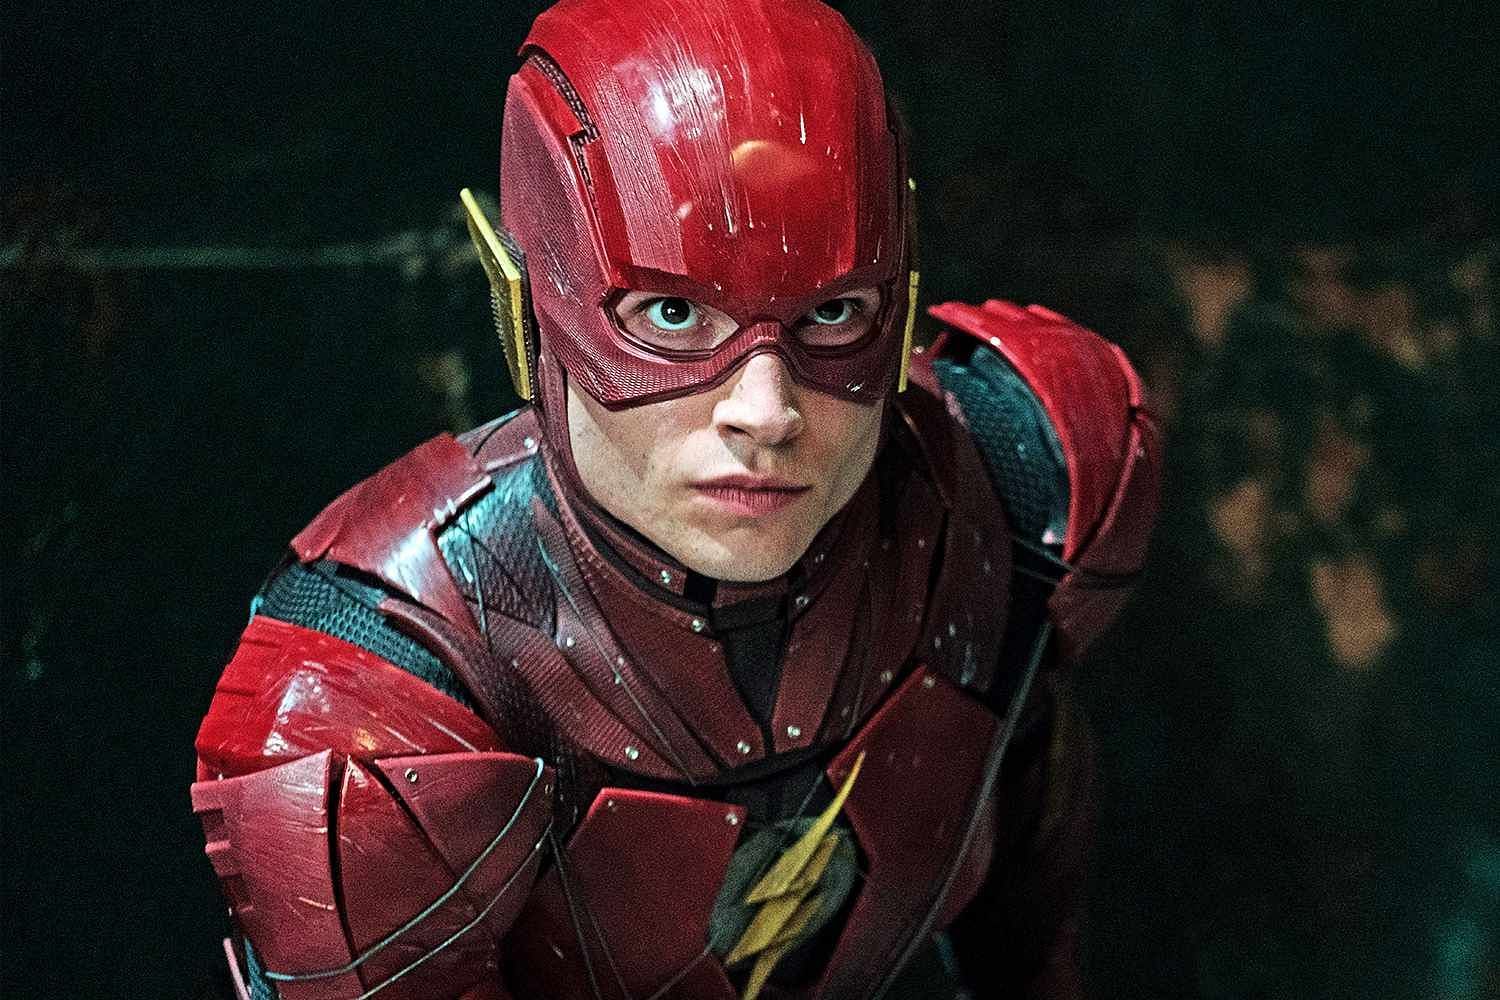 Barry Allen, the fastest man alive, races into the future in a Flash (Image via Warner Bros)